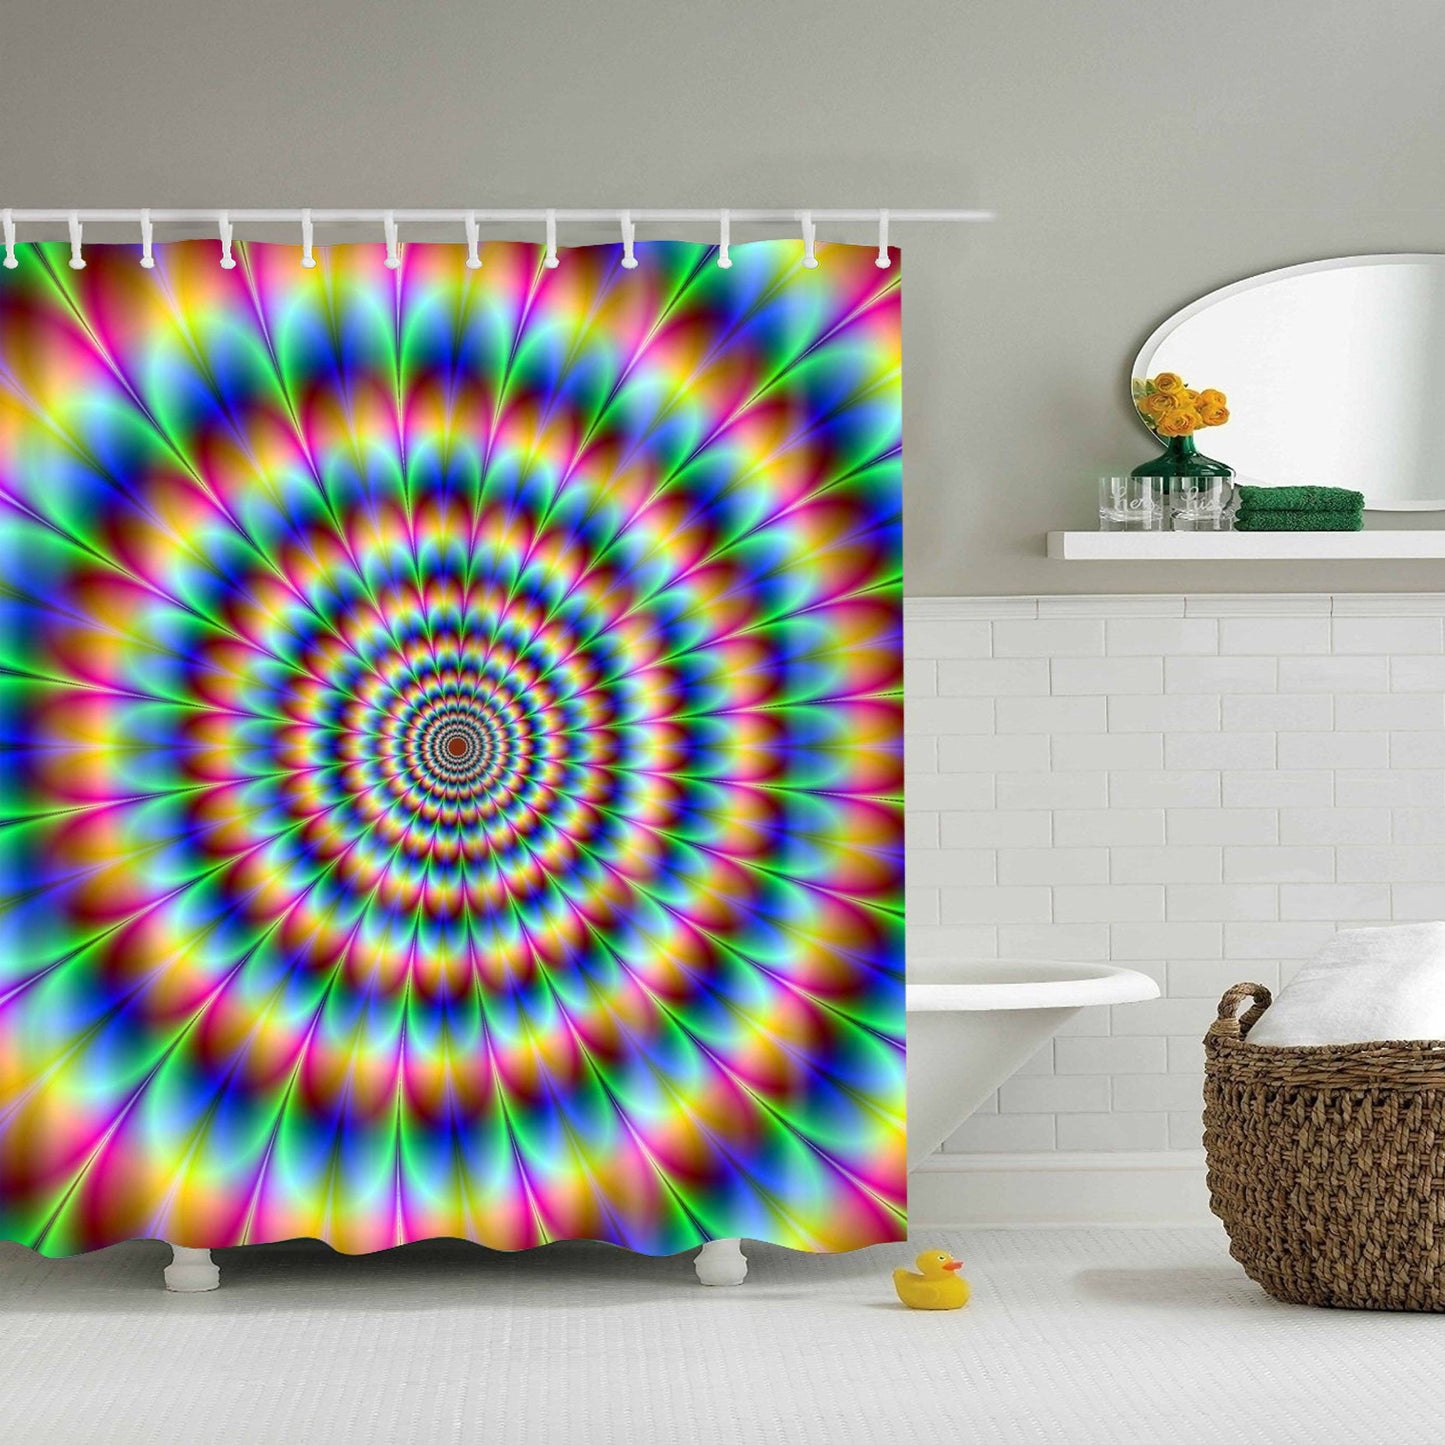 Colorful Dazzling Eye Psychedelic Trippy Shower Curtain